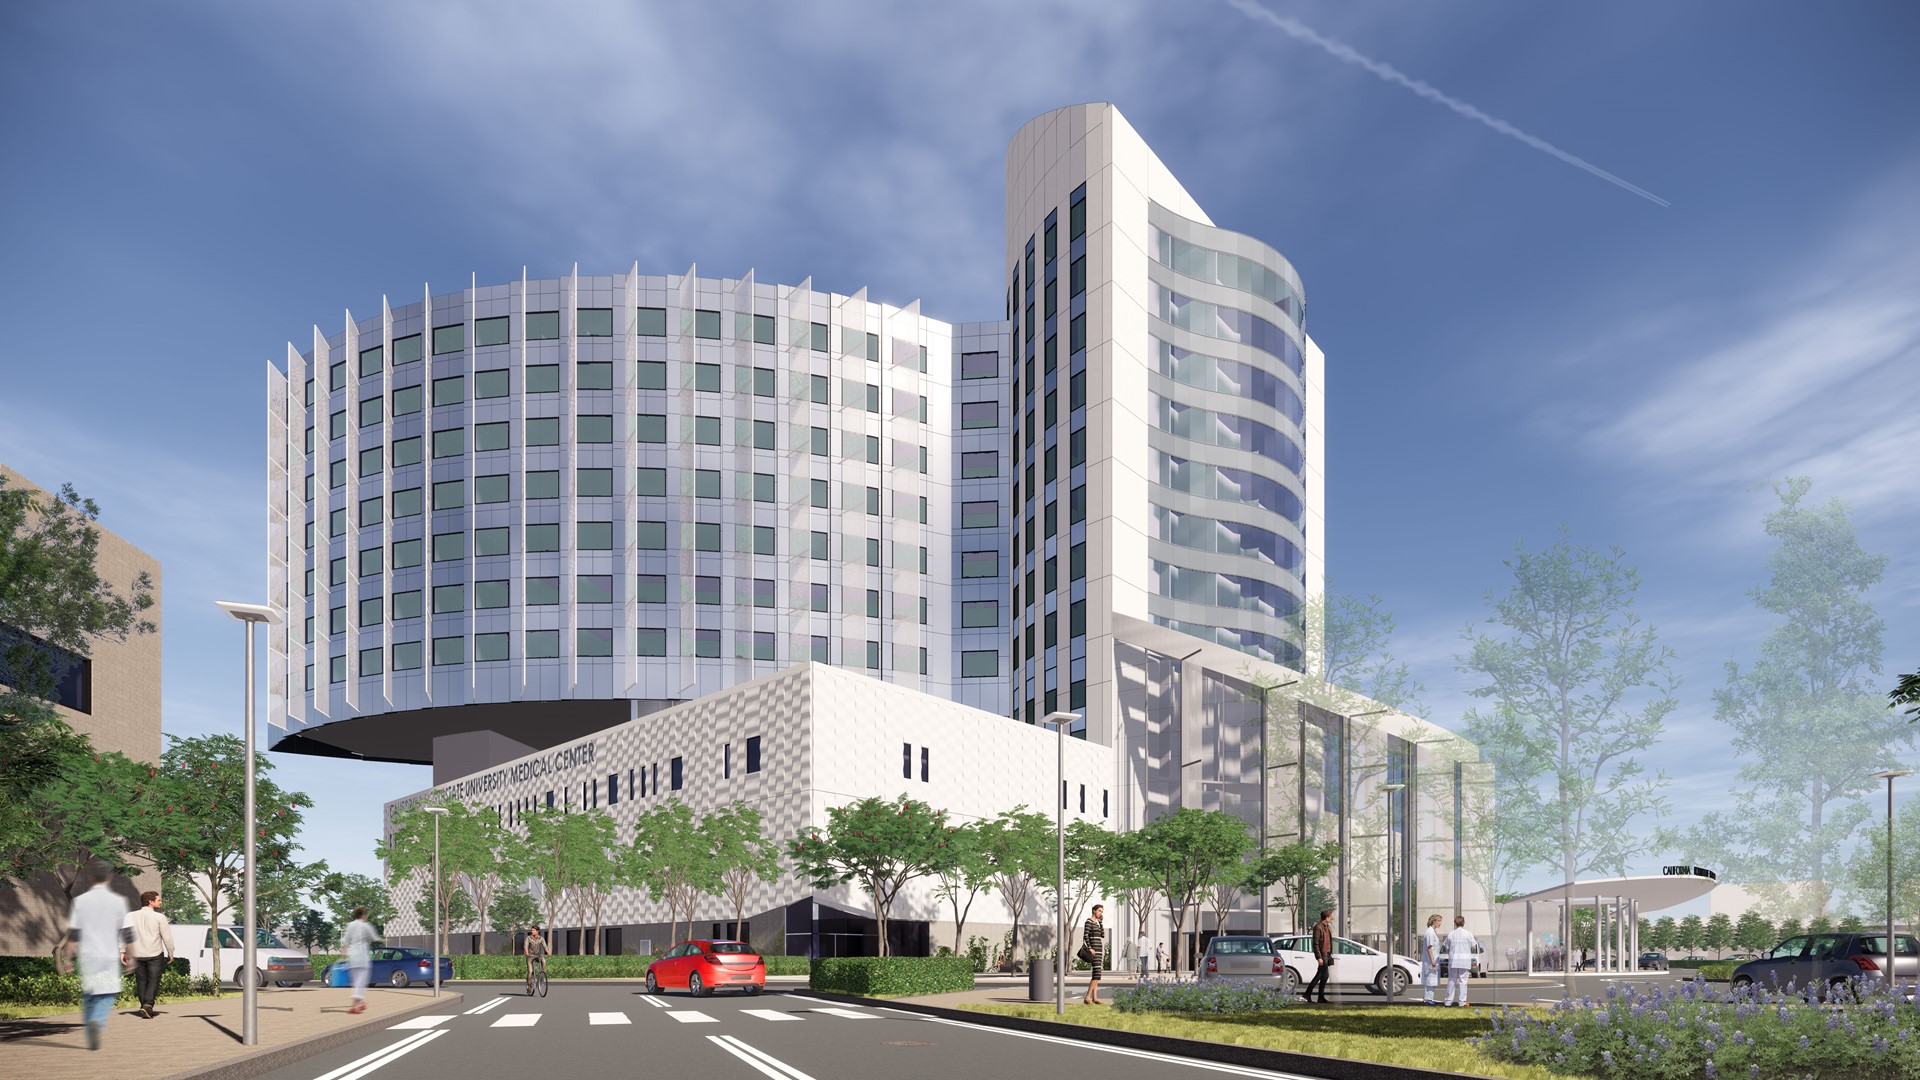 City leaders say the California Northstate University Medical Campus and adjacent development are projected to create 8,000 jobs over the next 10 years.